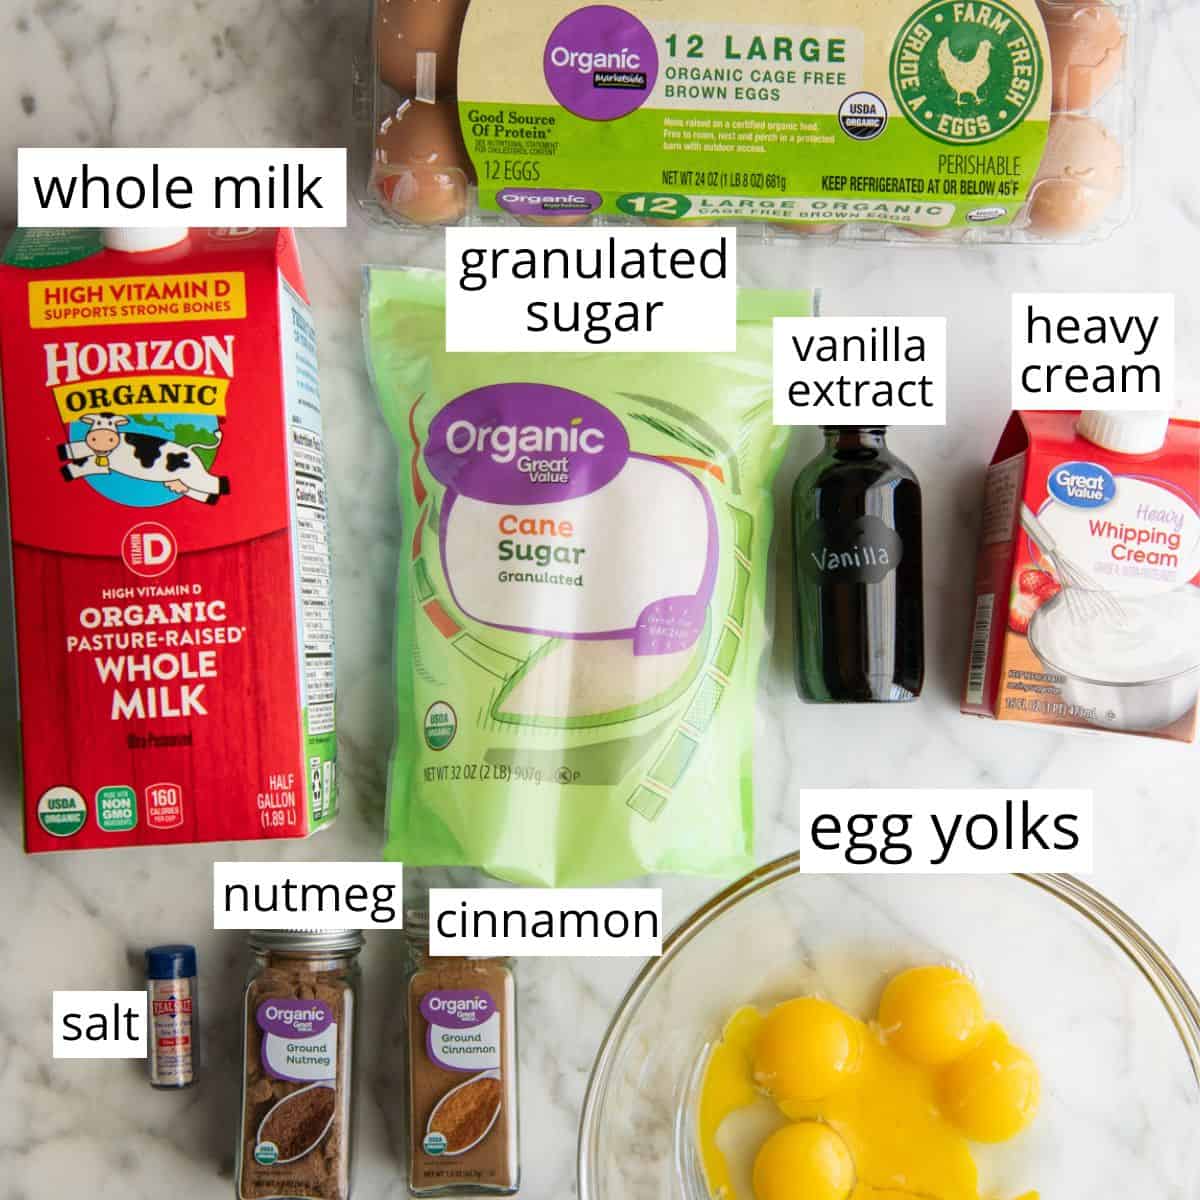 overhead photo of the labeled ingredients in the eggnog recipe